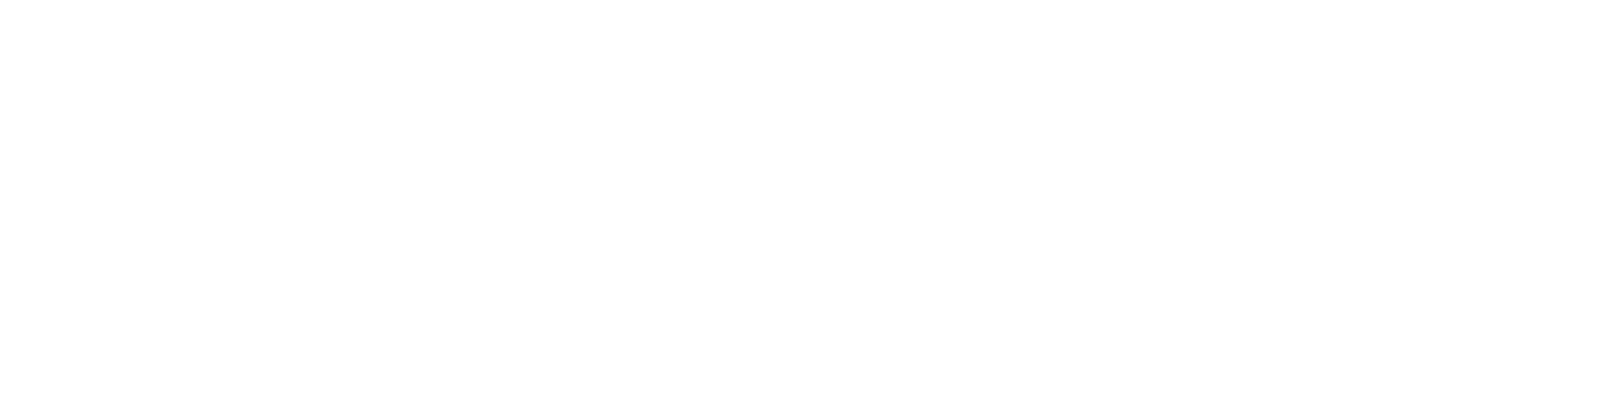 Injection Molding | Injection Moulding Factory - VulcanMold